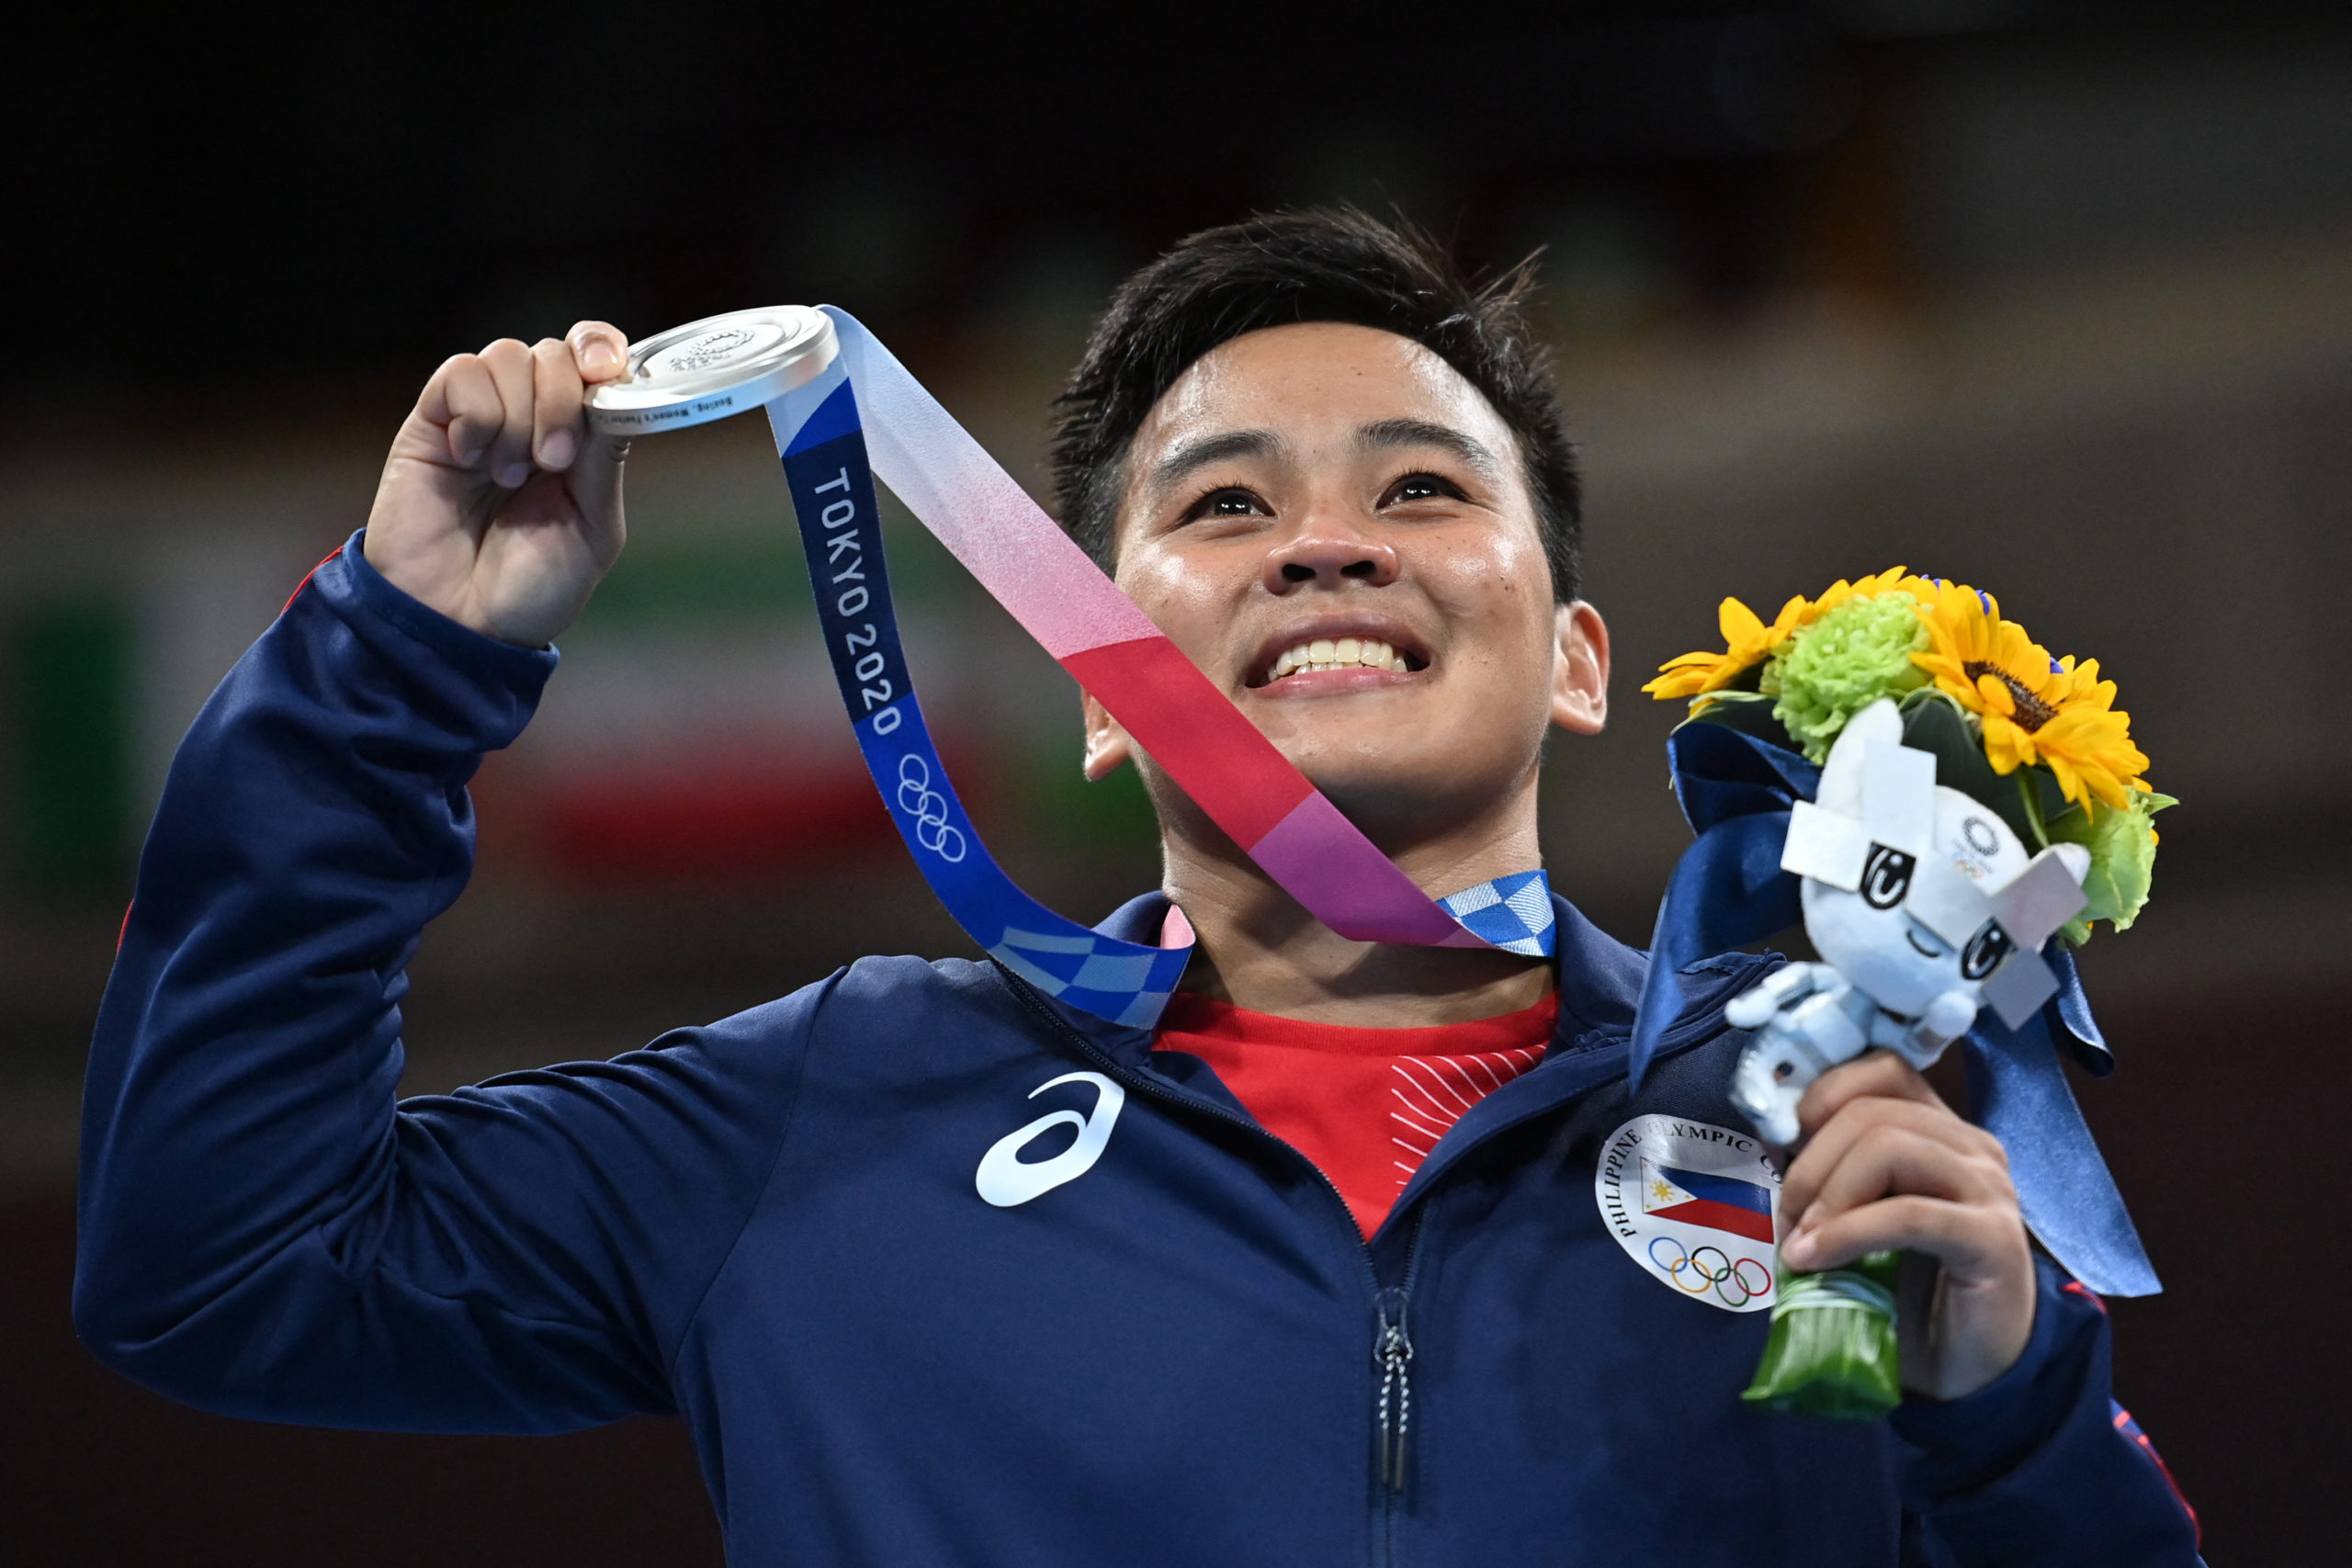 Silver medallist Philippines' Nesthy Petecio poses on the podium with her medal after the women's feather (54-57kg) boxing final bout during the Tokyo 2020 Olympic Games at the Kokugikan Arena in Tokyo on August 3, 2021.